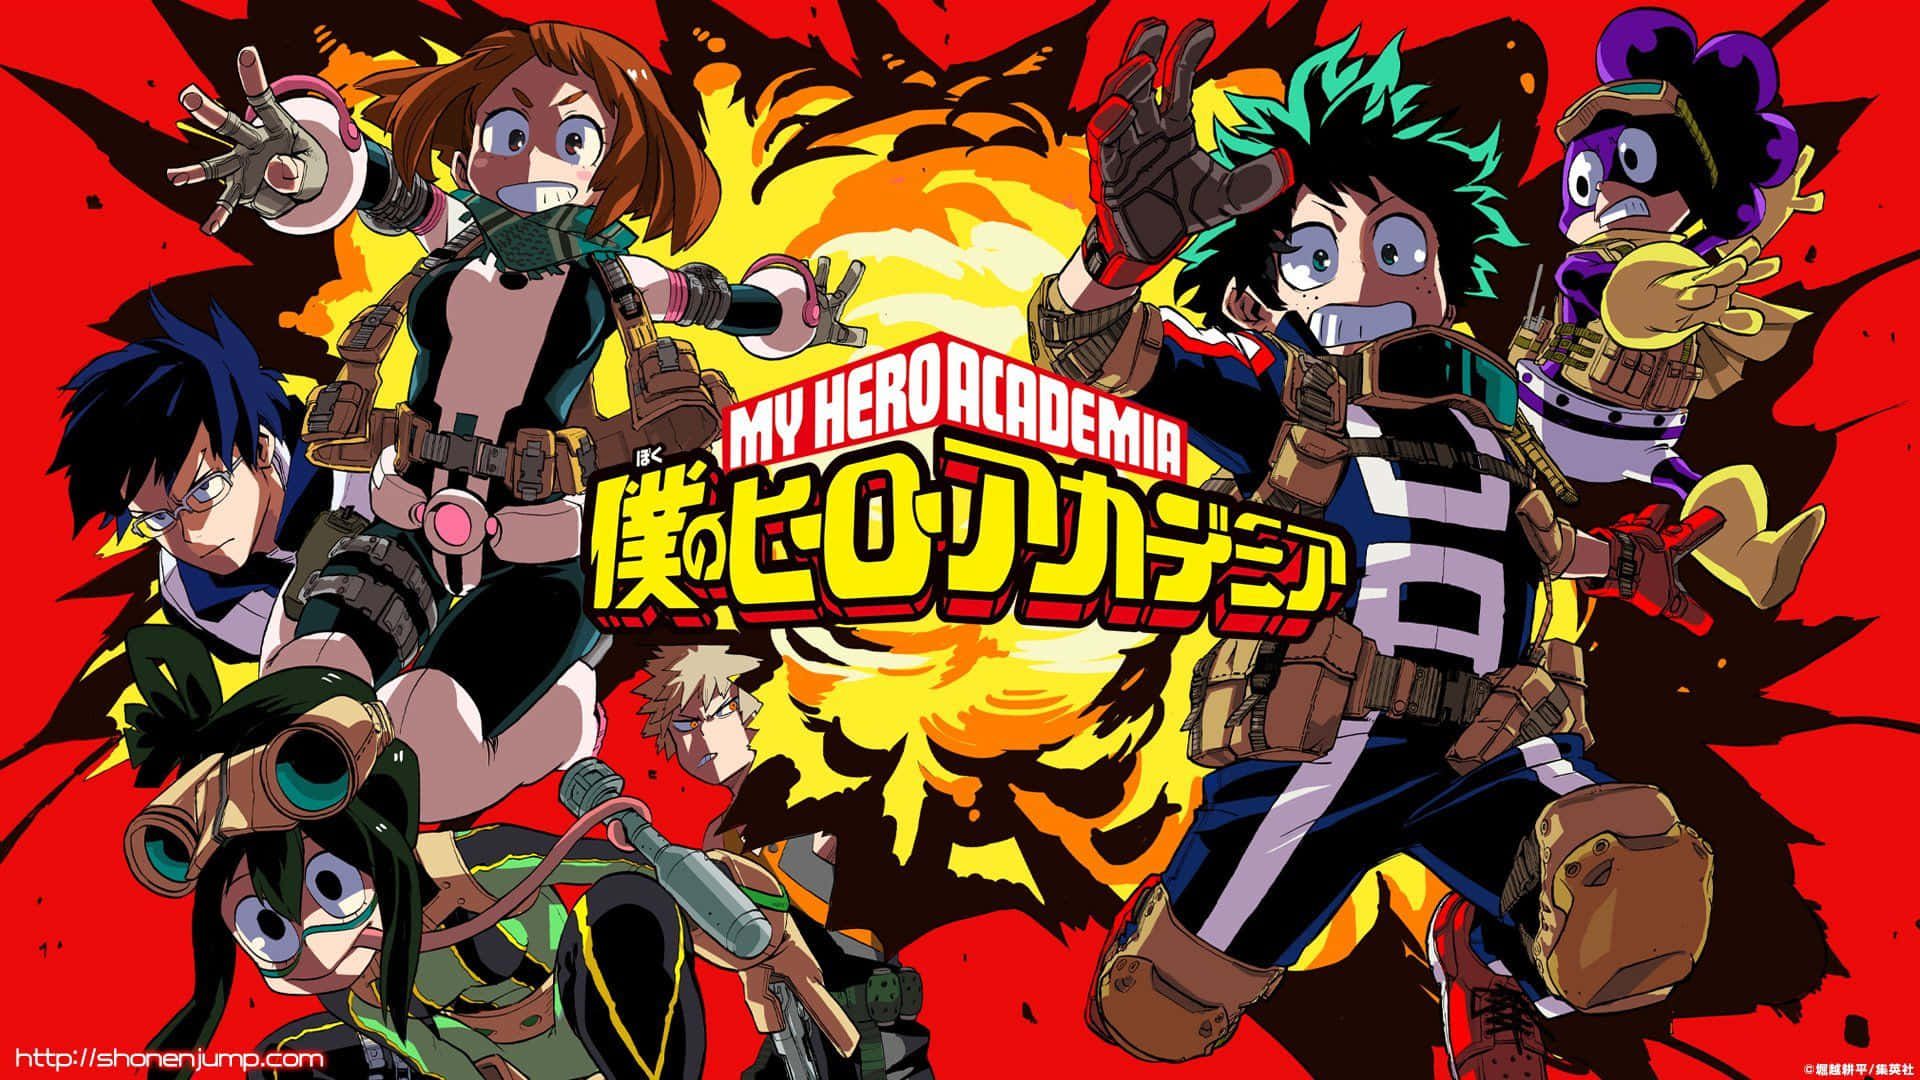 Get inspired with My Hero Academia and this stylish laptop design! Wallpaper